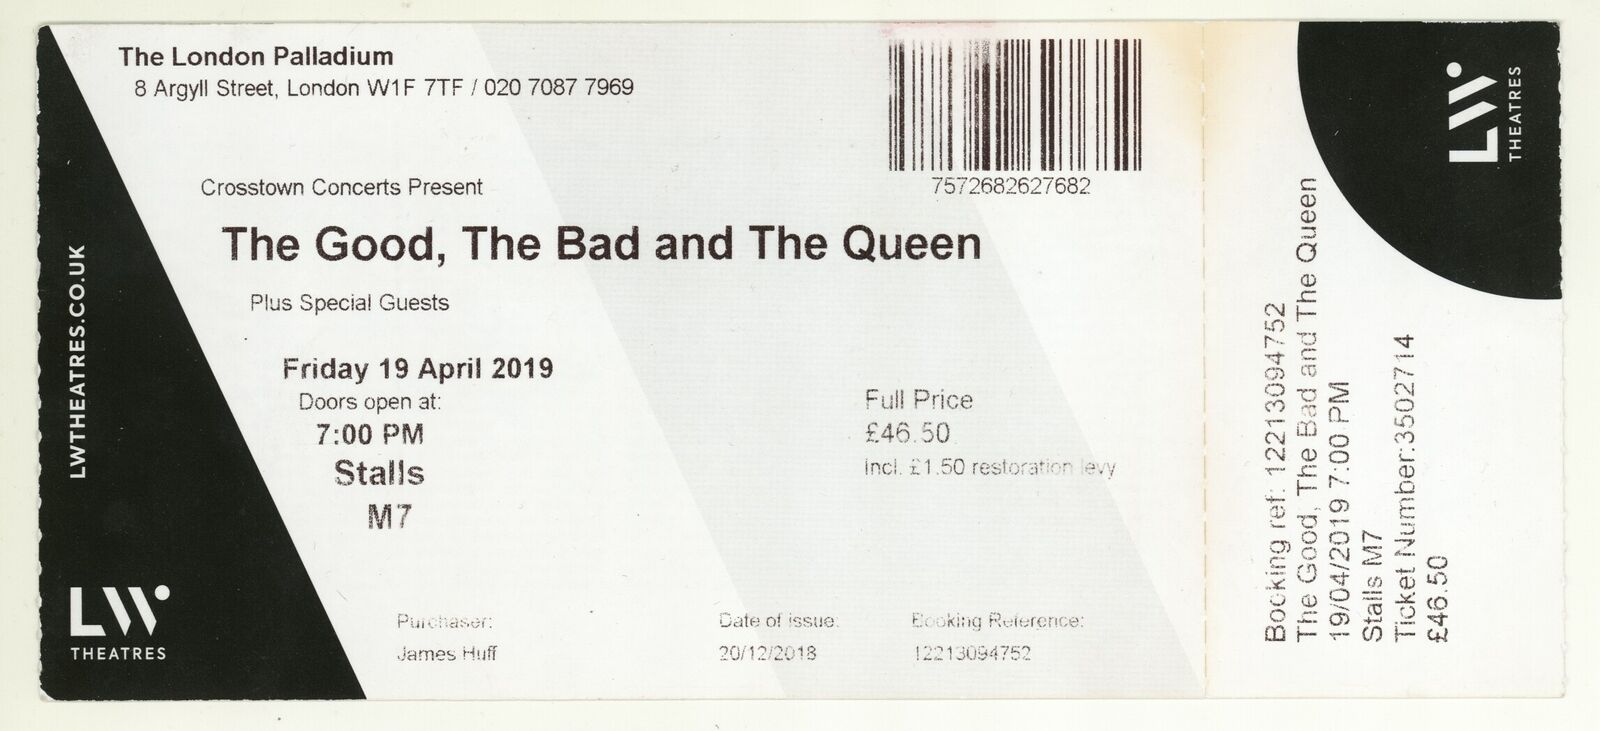 Rare The Good The Bad And The Queen 4/19/19 London Uk Palladium Ticket Stub!